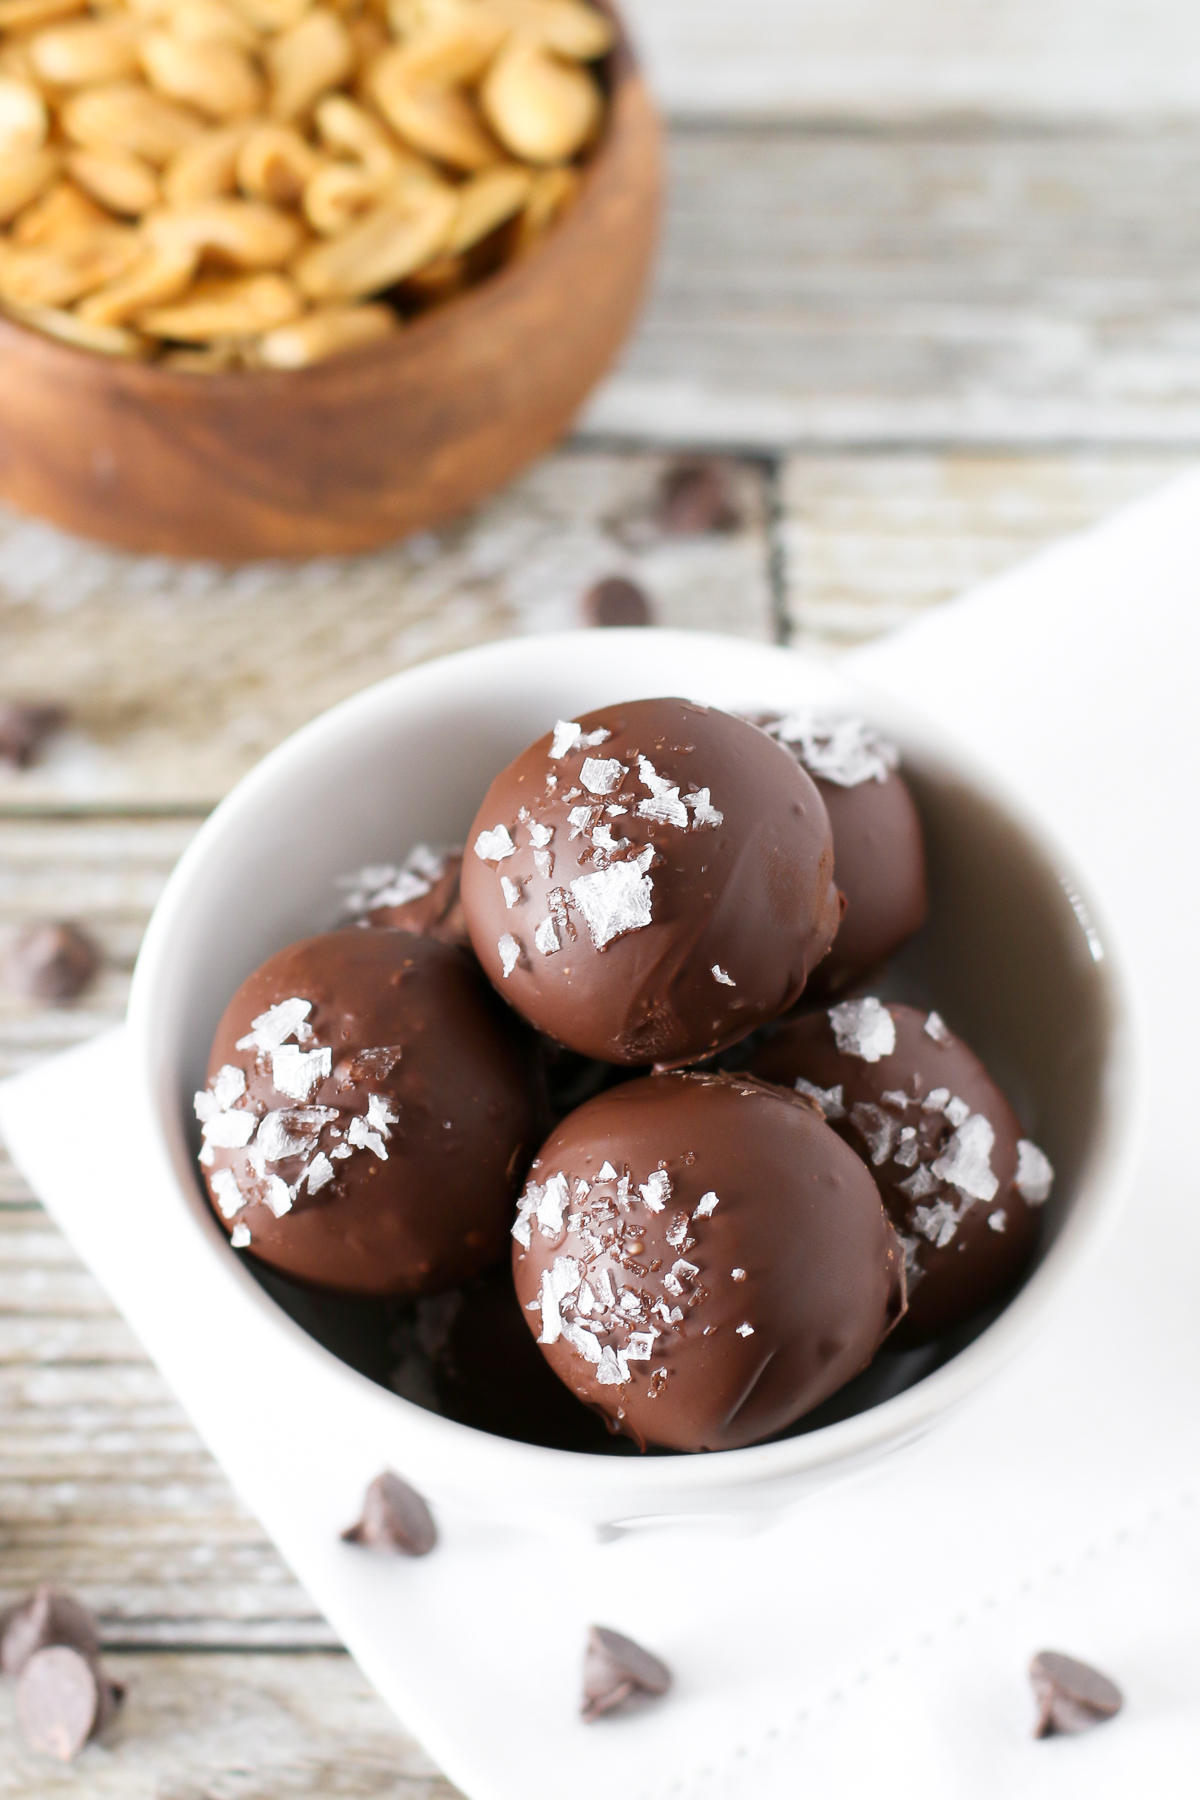 Gluten Free Vegan Salted Chocolate Peanut Butter Truffles. 3-ingredient creamy peanut butter truffles, coated in chocolate and a sprinkling of sea salt flakes. 